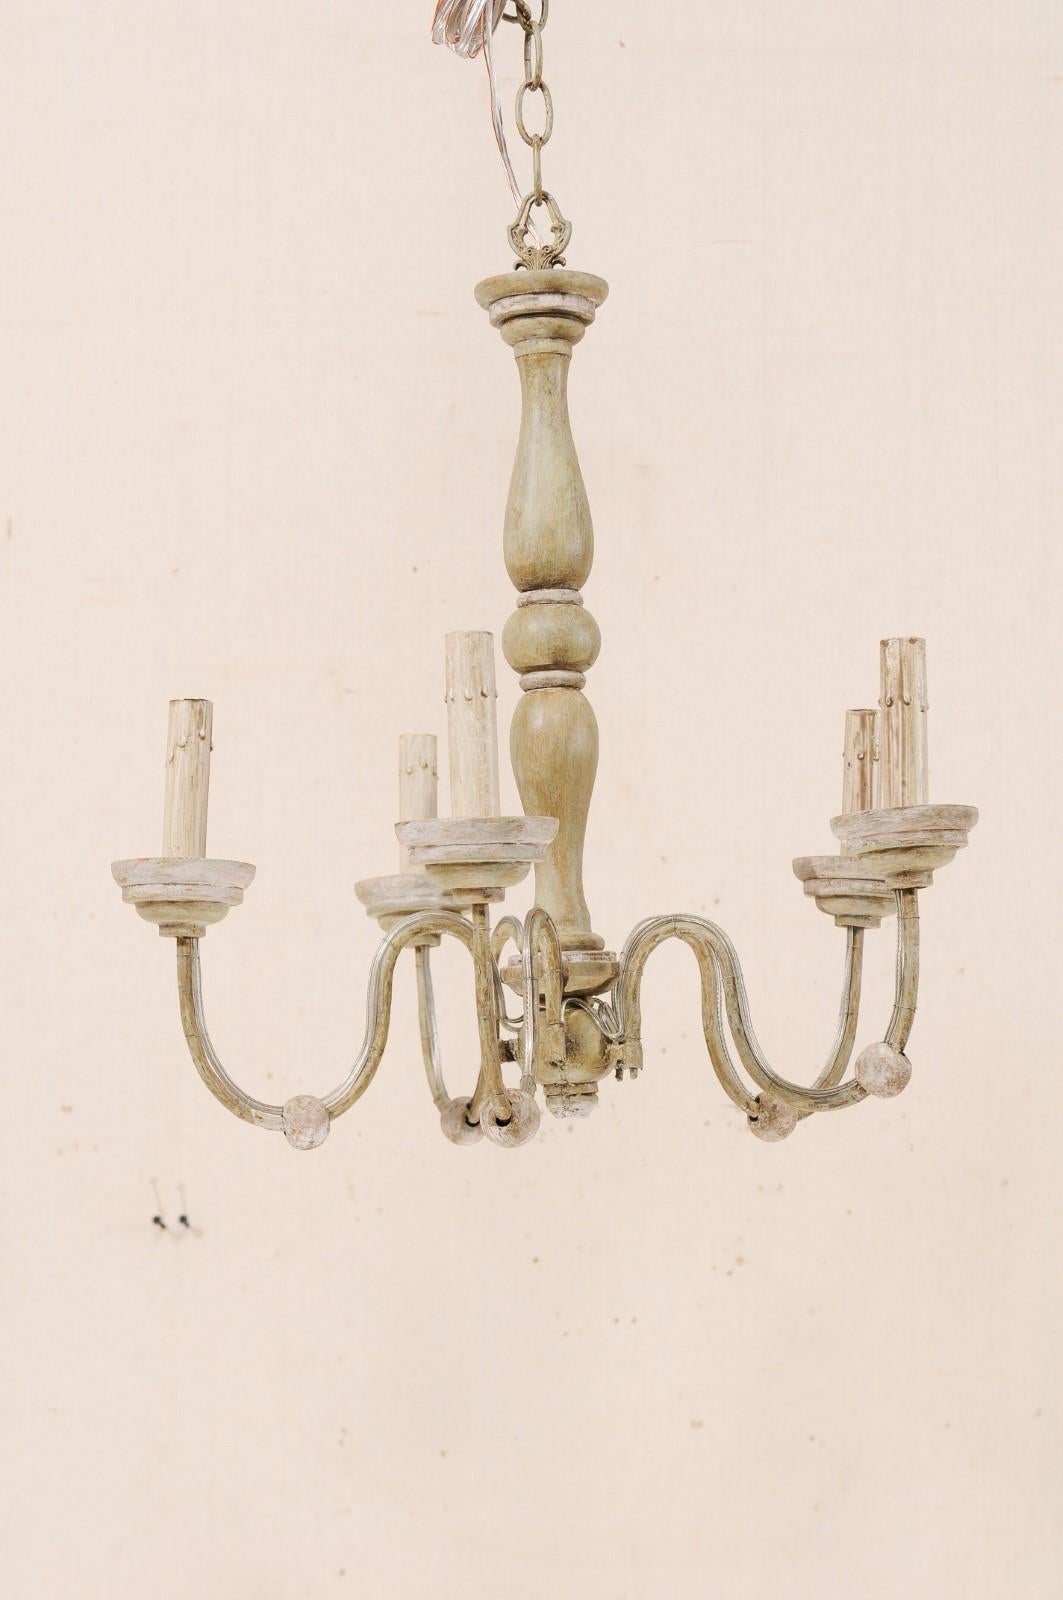 A French midcentury five-light painted wood and metal chandelier. This mid-20th century chandelier from France features a turned wood column with fluid s-shaped swooping arms lifting up and out from the bottom. The five metal arms are each adorn